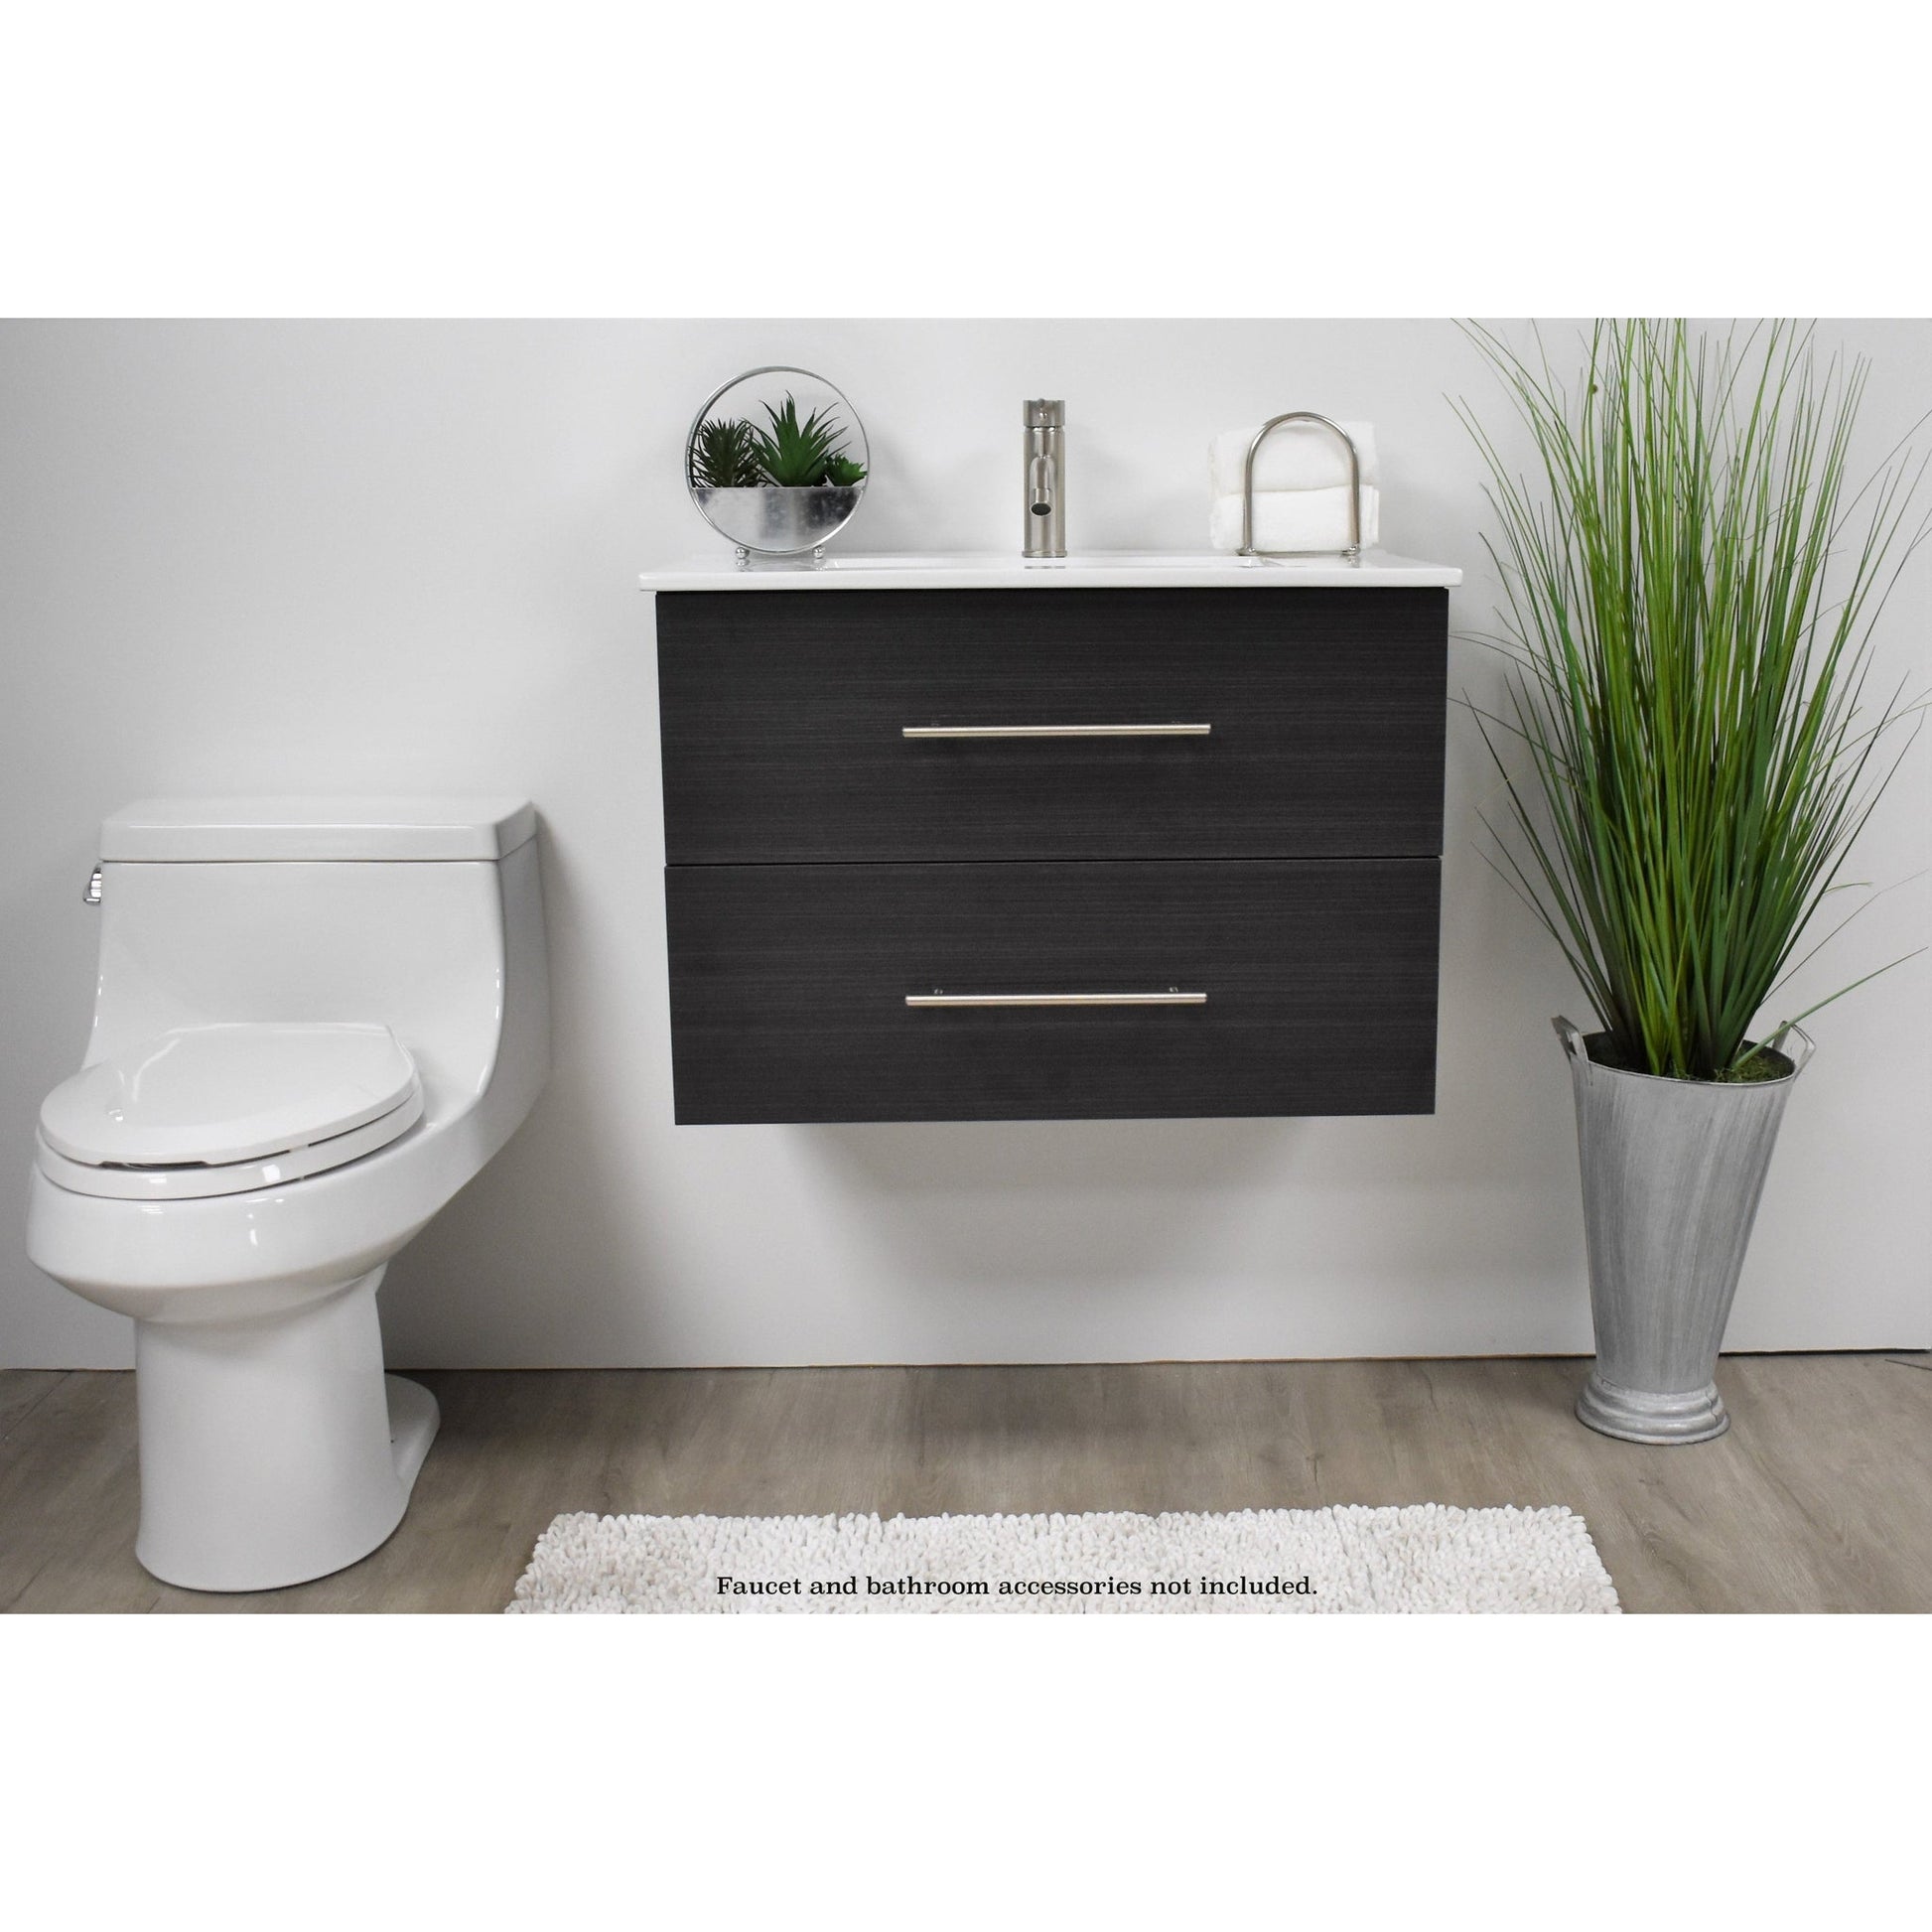 Volpa USA Napa 30" Black Ash Wall-Mounted Floating Modern Bathroom Vanity With Integrated Ceramic Top and Satin Nickel Round Handles